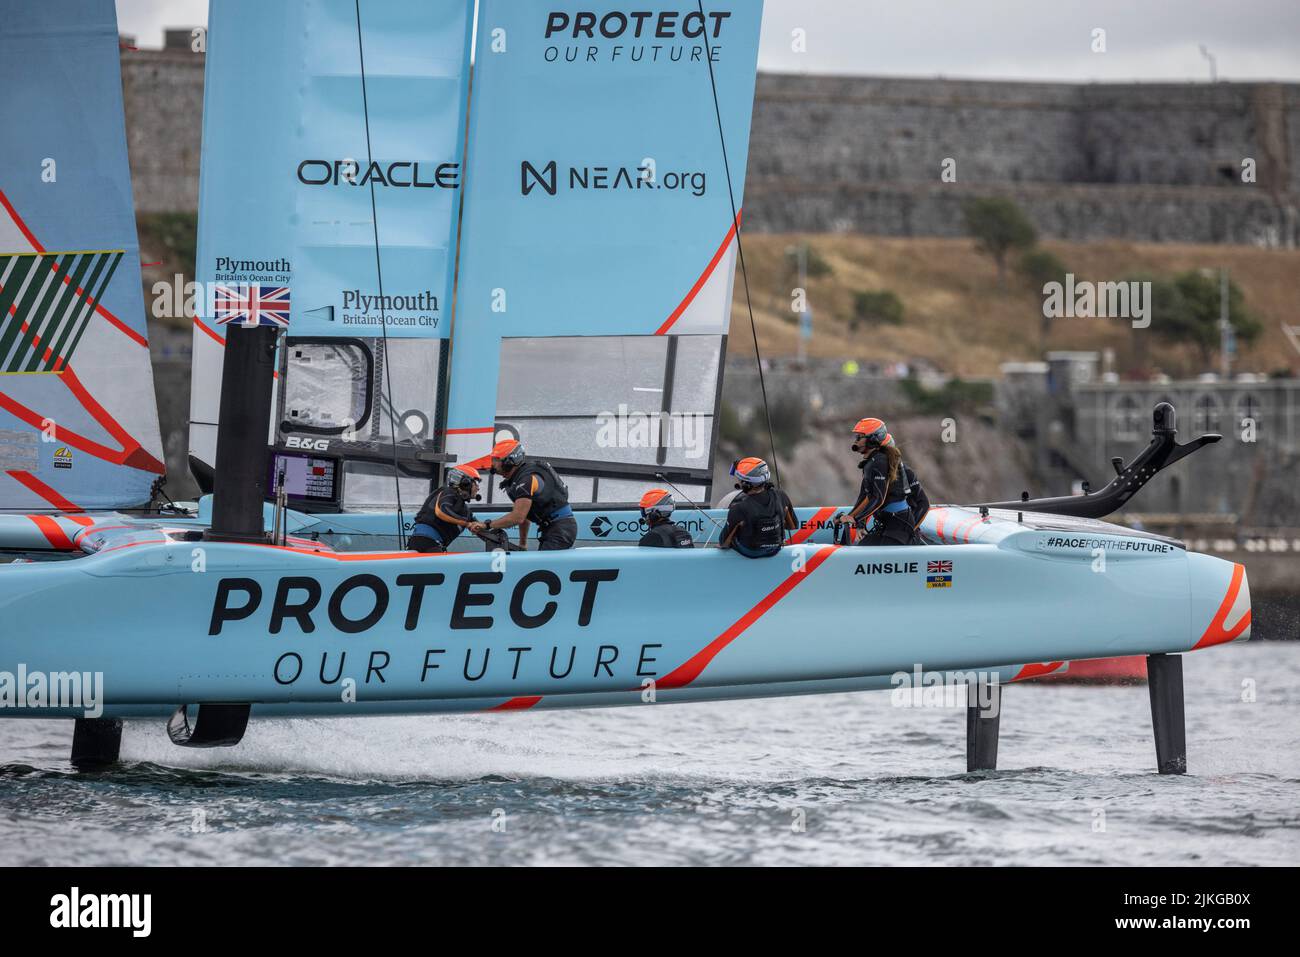 THE DUCHESS OF CAMBRIDGE JOINS THE 1851 TRUST AND THE GREAT BRITAIN SAILGP TEAM IN PLYMOUTH, DEVON, UK Stock Photo